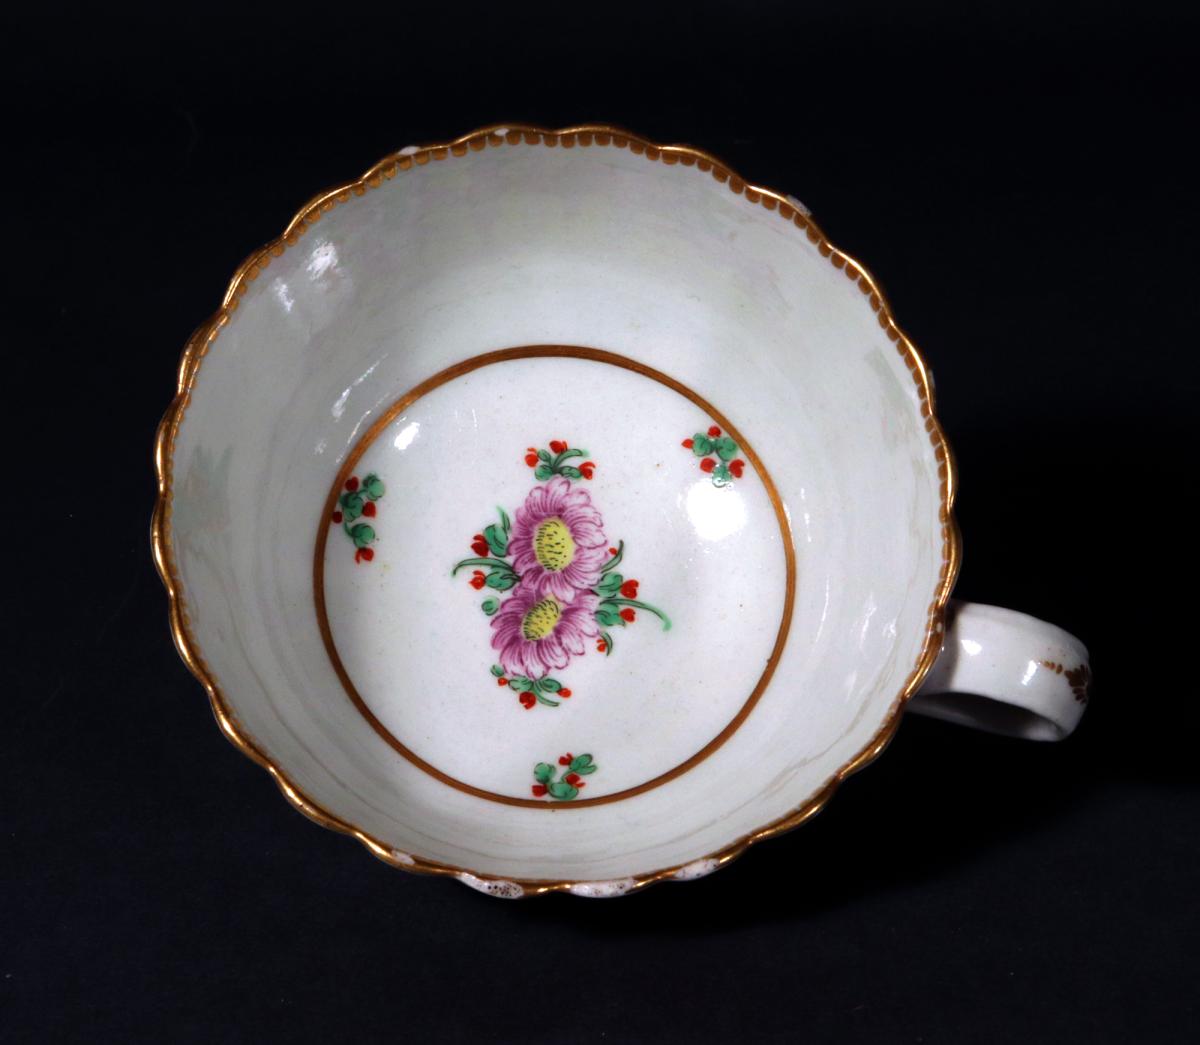 First Period Worcester Porcelain "Holly Berry" Pattern Teacup and Saucer, Hop Trellis Pattern, Circa 1775.